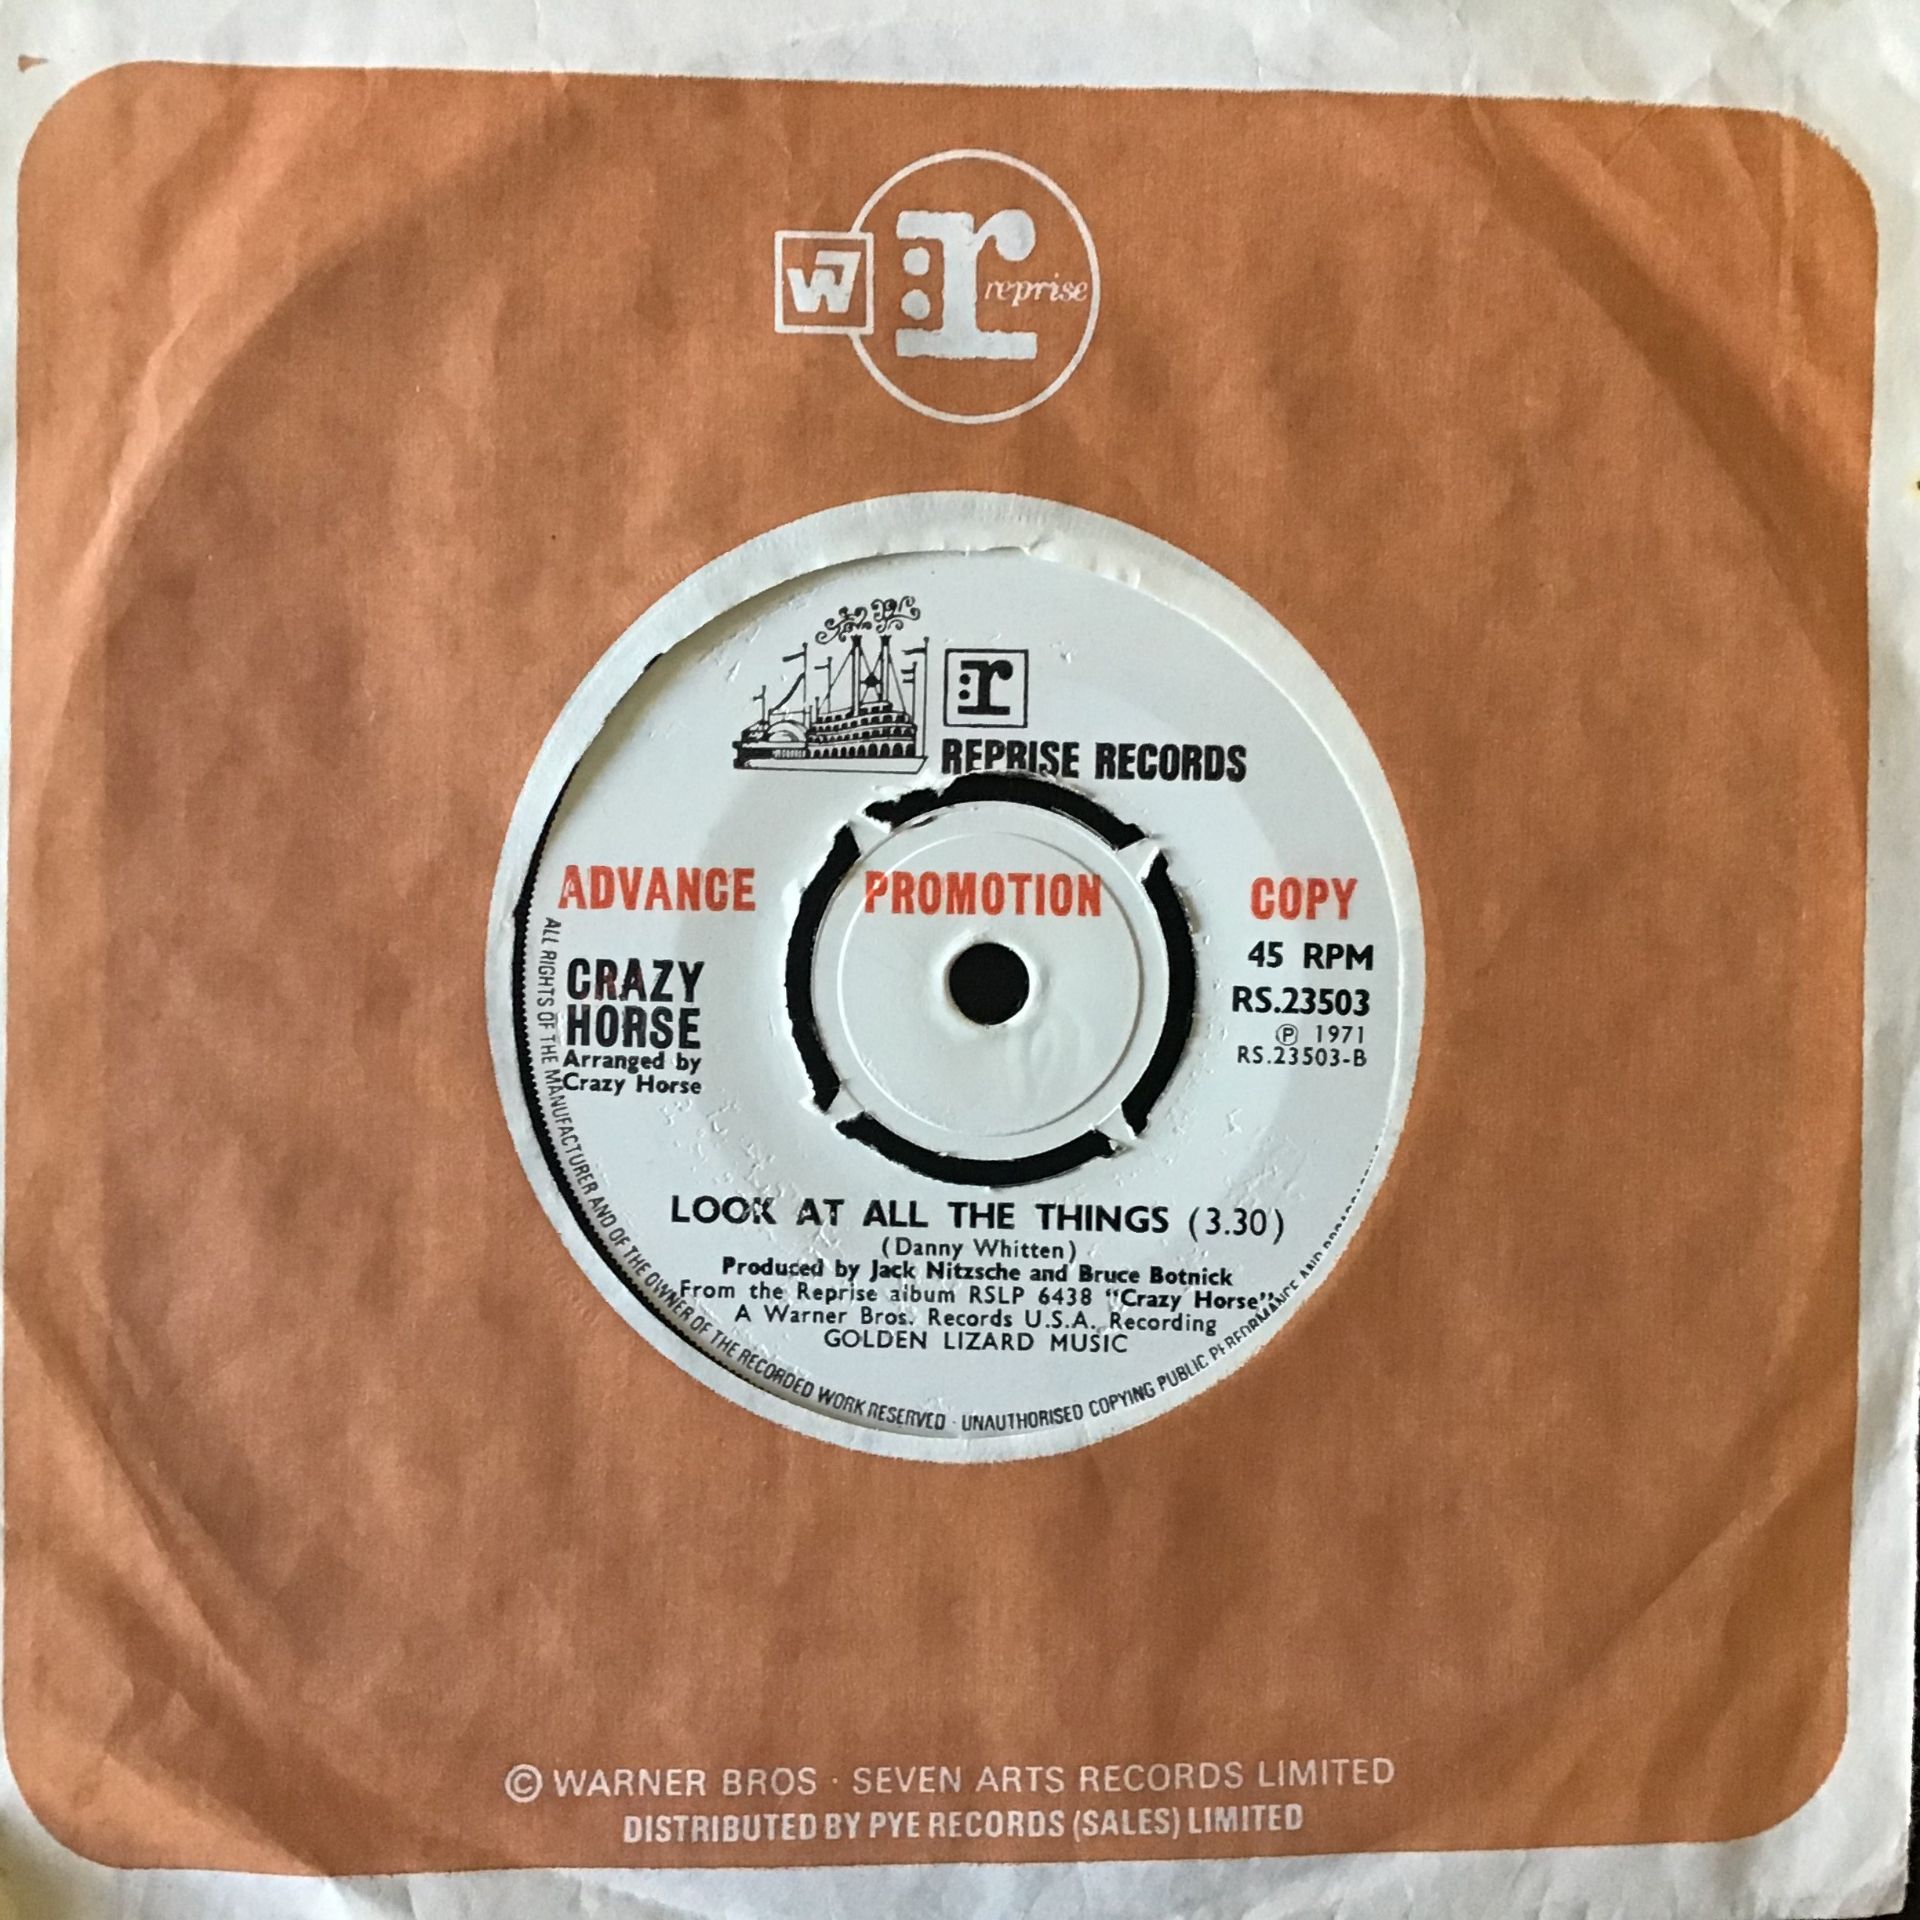 CRAZY HORSE 7” PROMO - DANCE, DANCE, DANCE. This is a nice Reprise RS 23503 from 1971 found here - Image 2 of 2